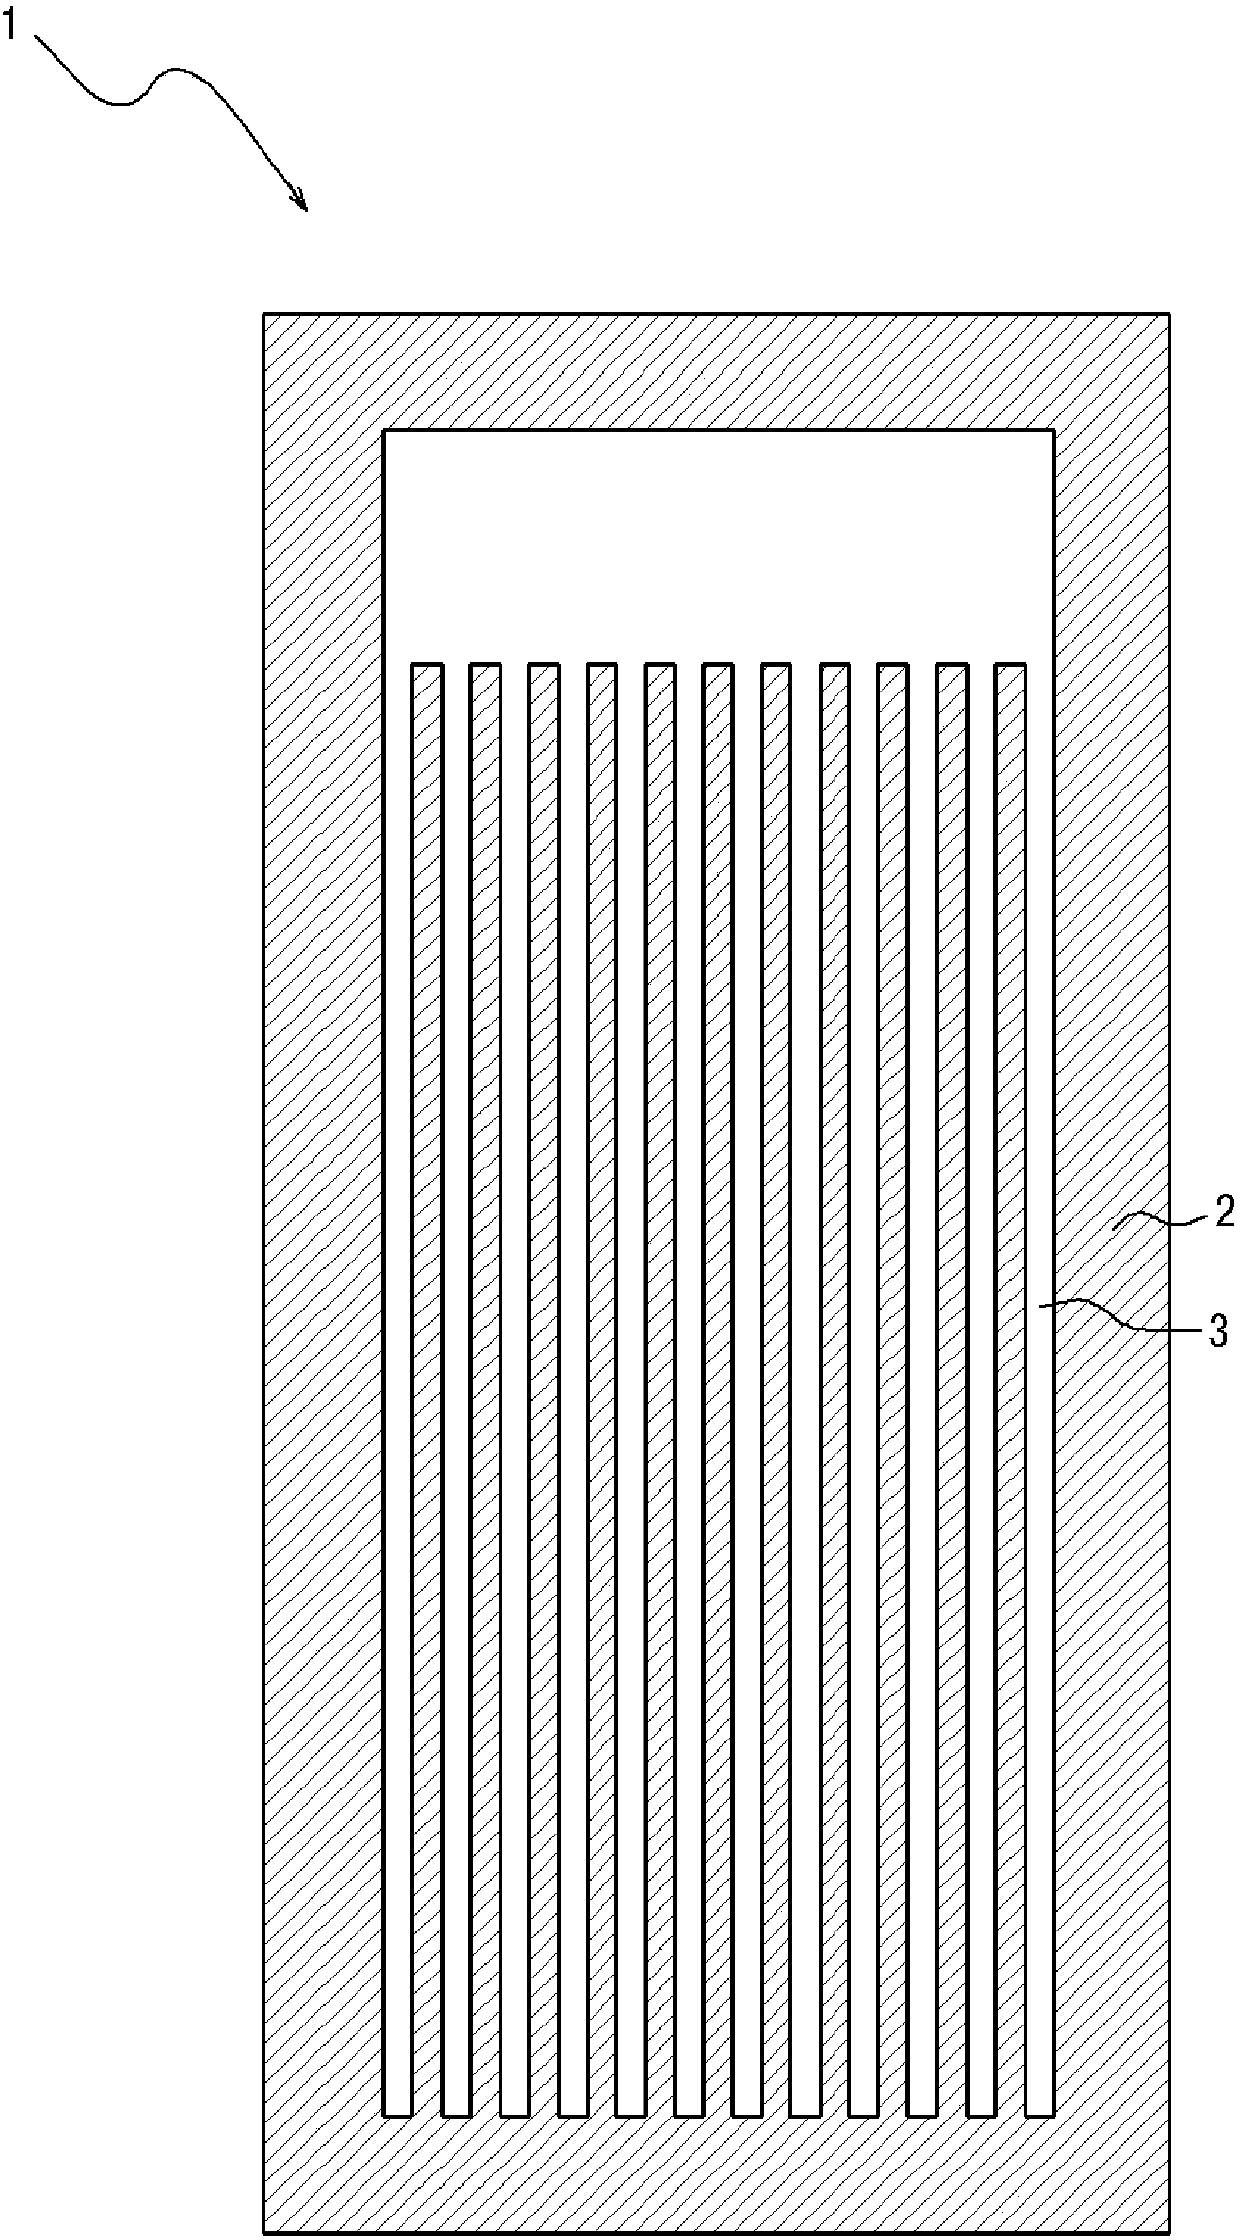 Substrate for photoelectric conversion elements